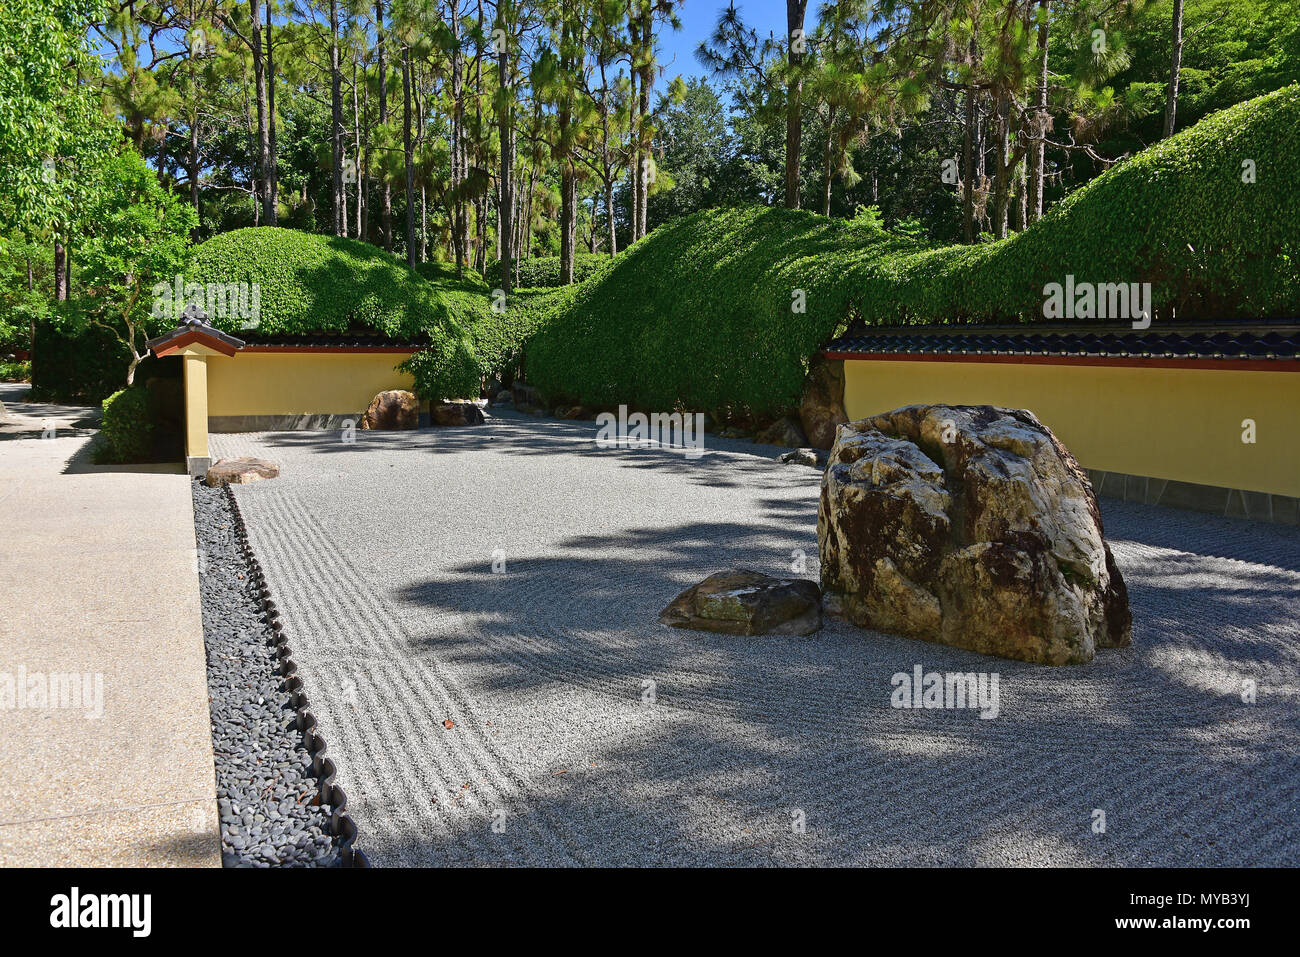 Rock garden at the Morikami Museum and Japanese Gardens, overall view with rocks, boundary wall and raked gravel, Delray Beach, FL, USA Stock Photo